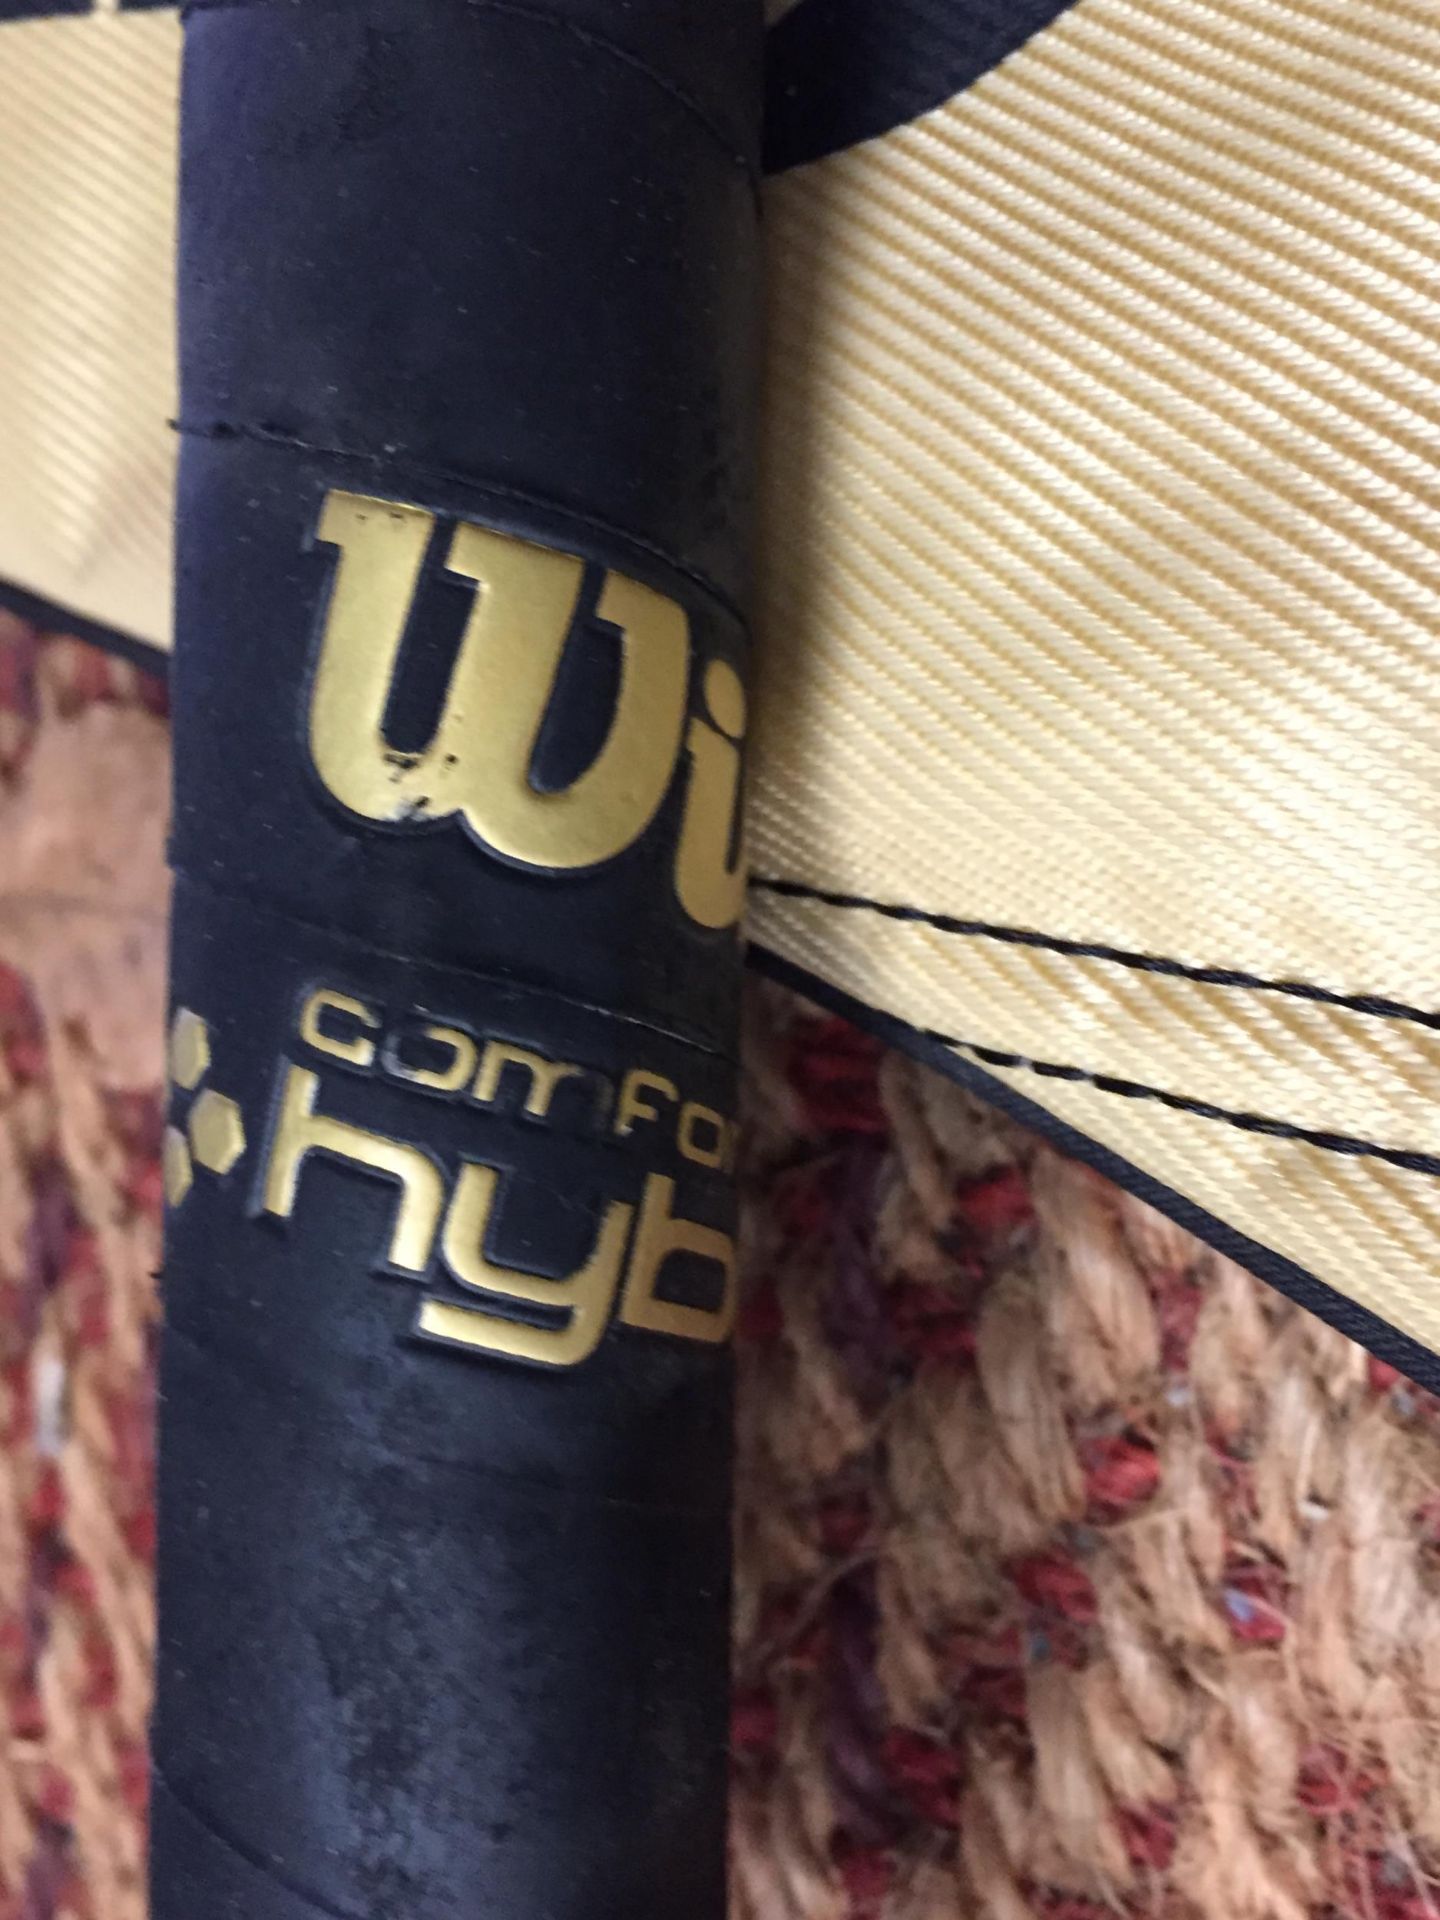 A WILSON HYBRID SPORTS RACKET WITH CASE - Image 2 of 2